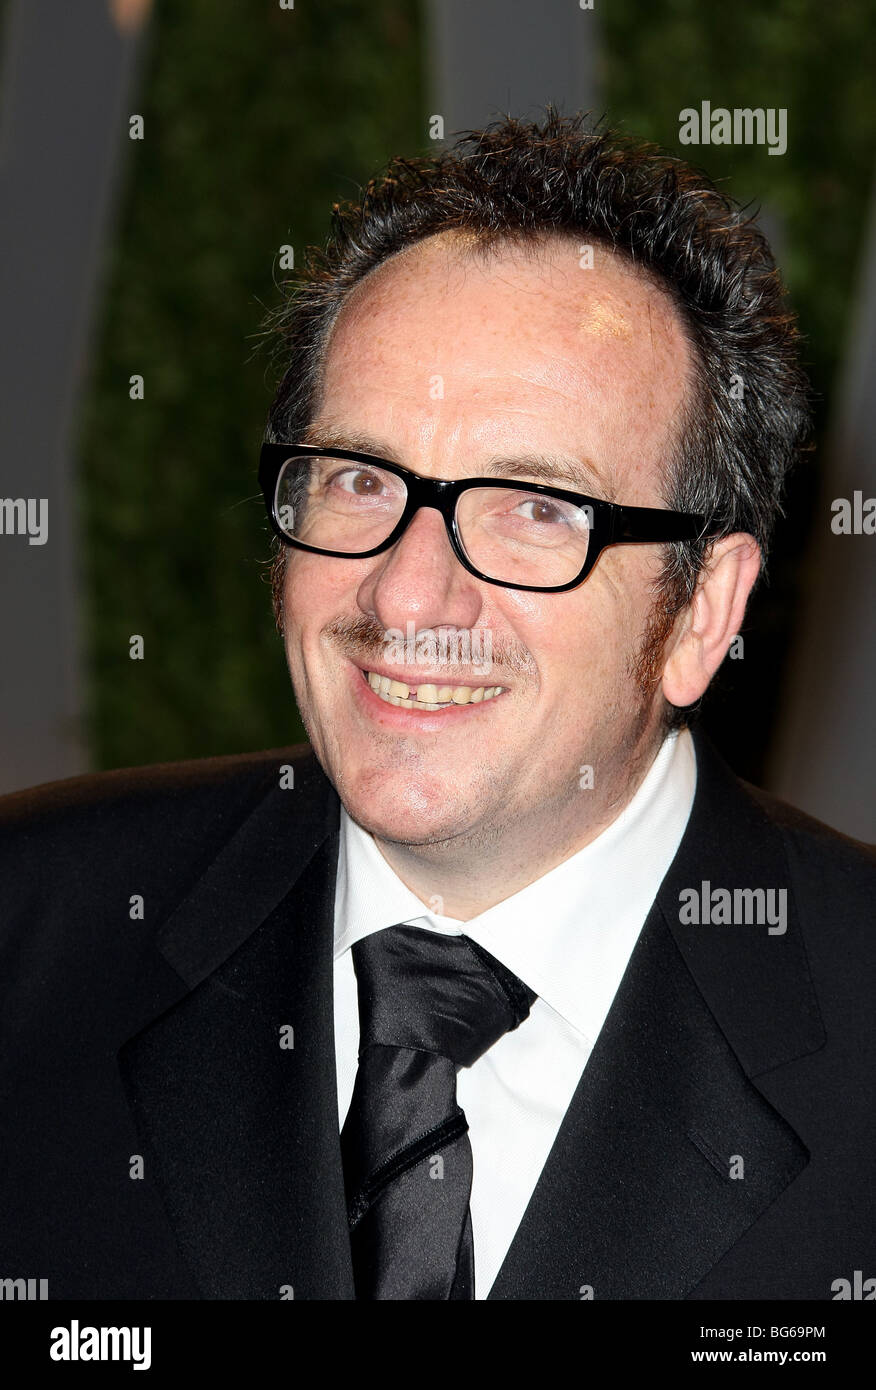 ELVIS COSTELLO 2009 VANITY FAIR OSCAR PARTY WEST HOLLYWOOD Los Angeles CA USA 22 Février 2009 Banque D'Images